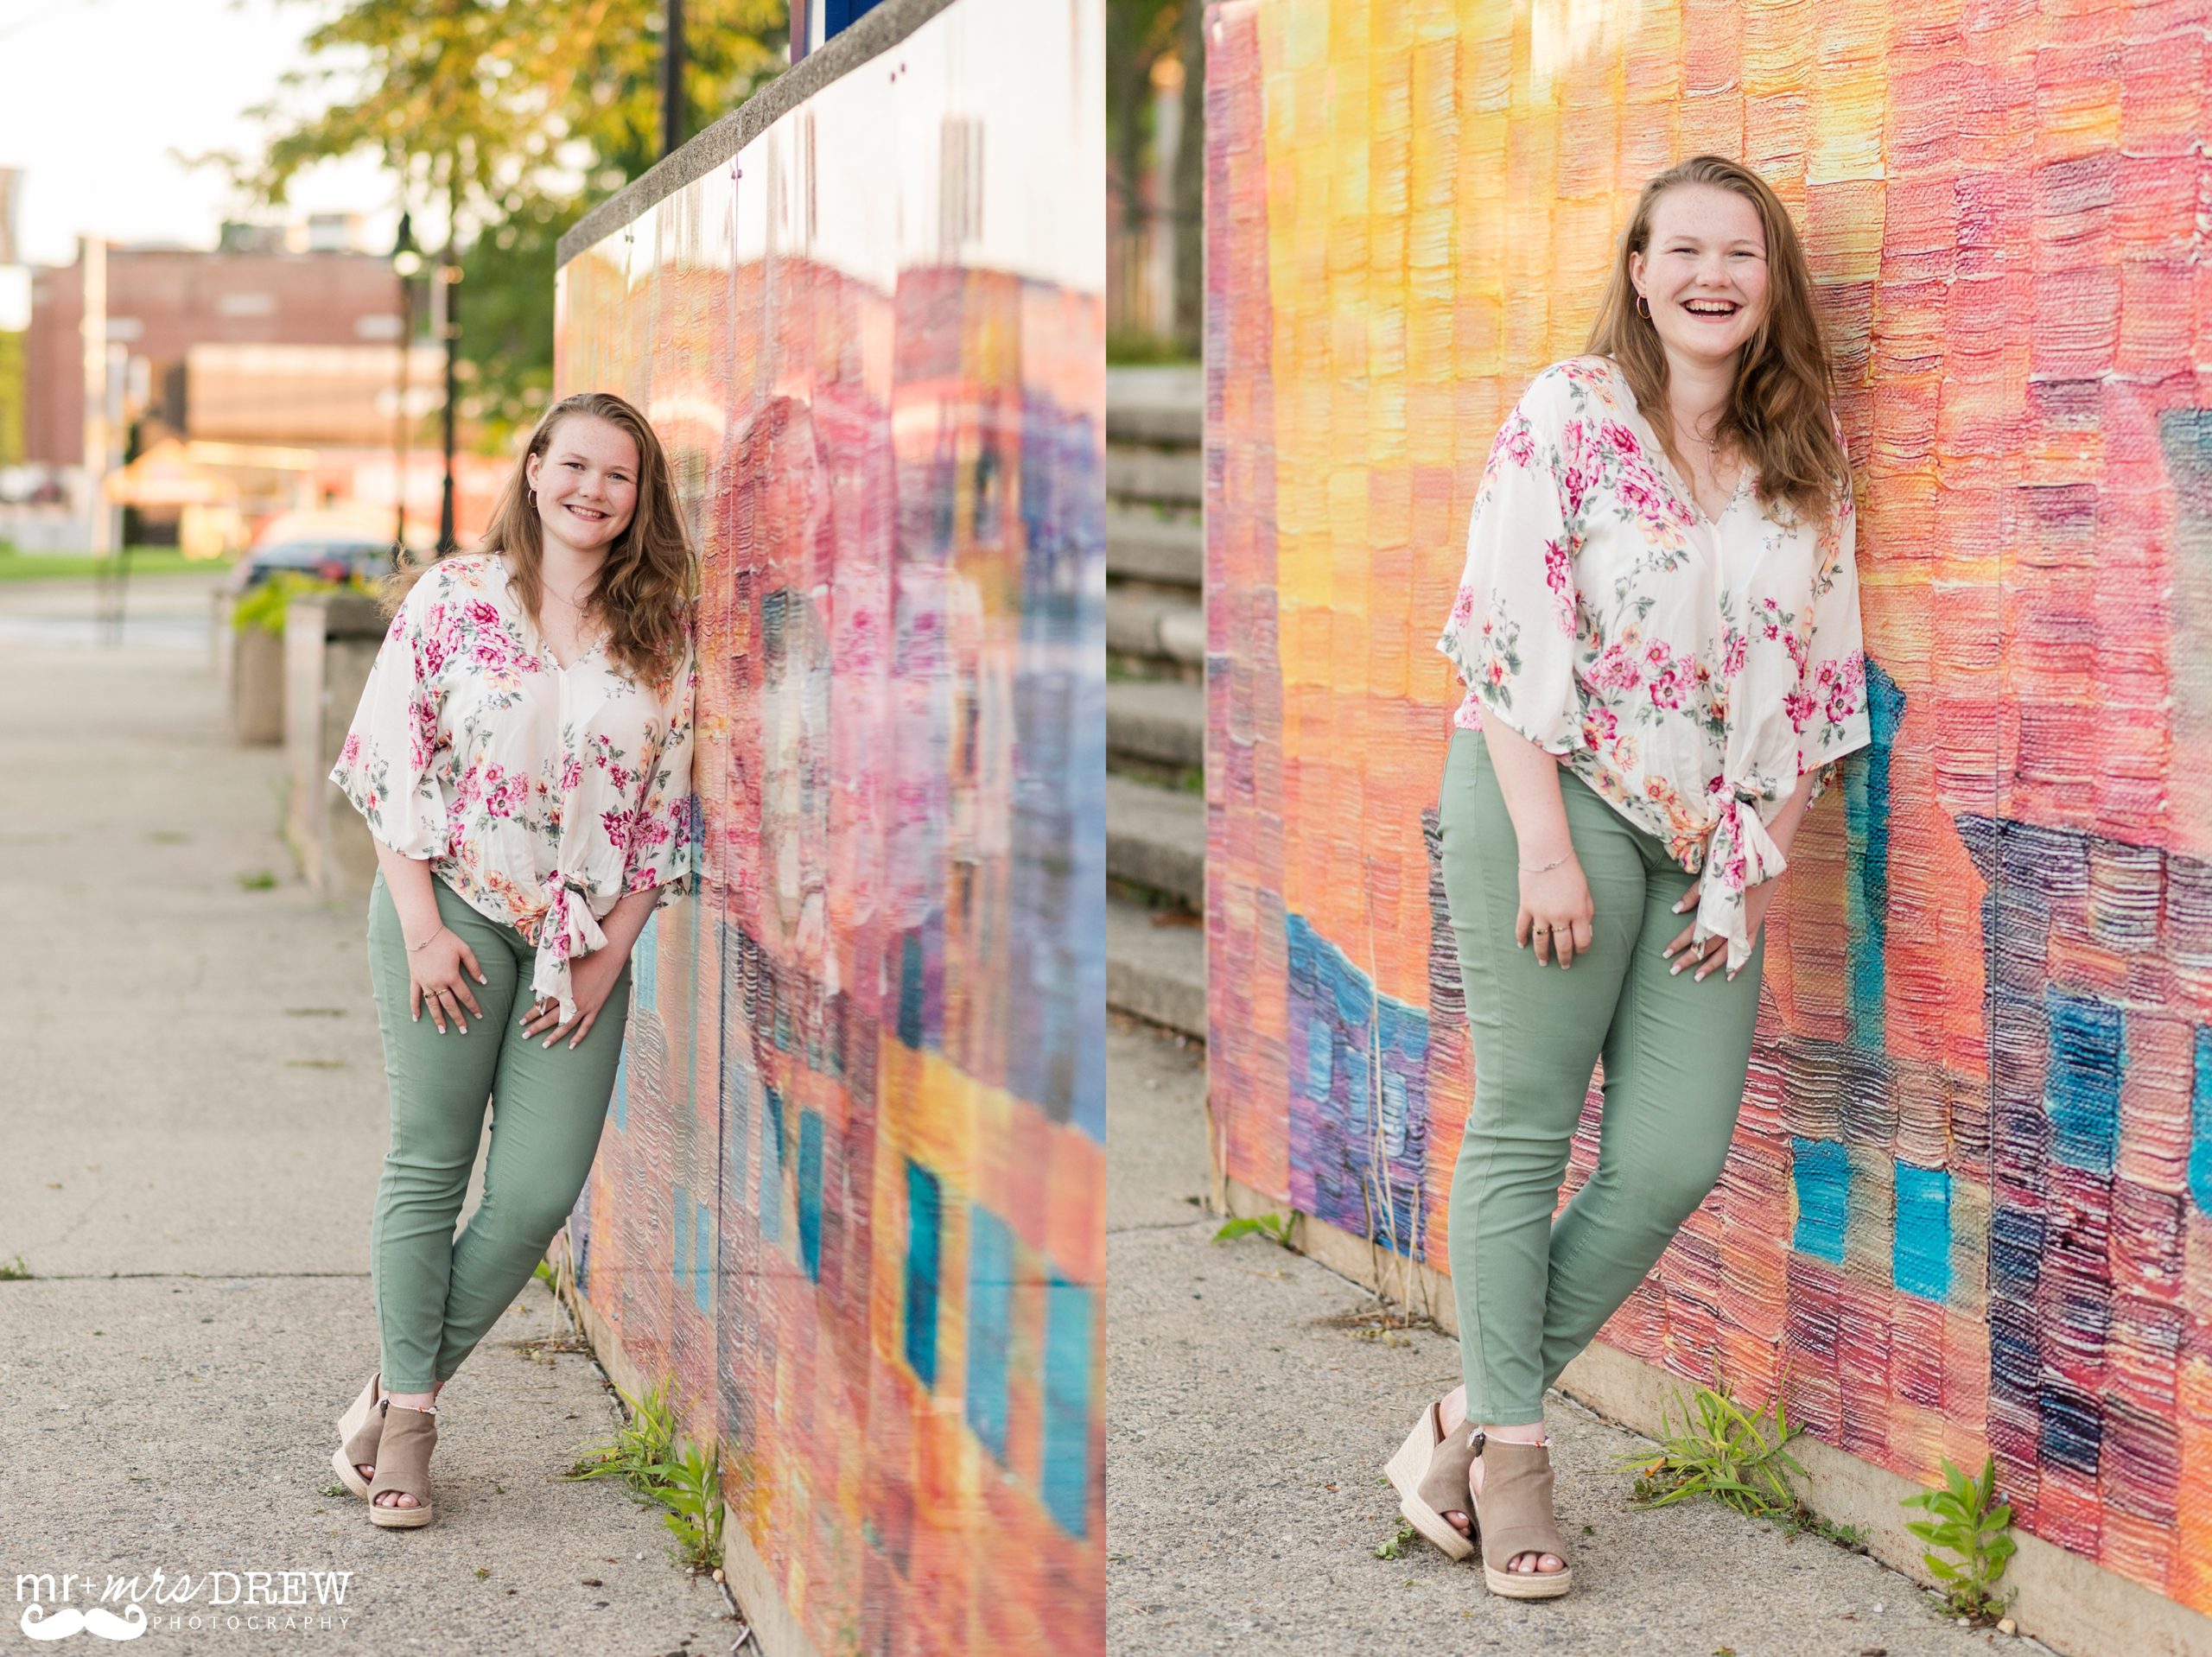 Senior Portraits Downtown Lowell - Meredyth is laughing in front of a colorful wall.